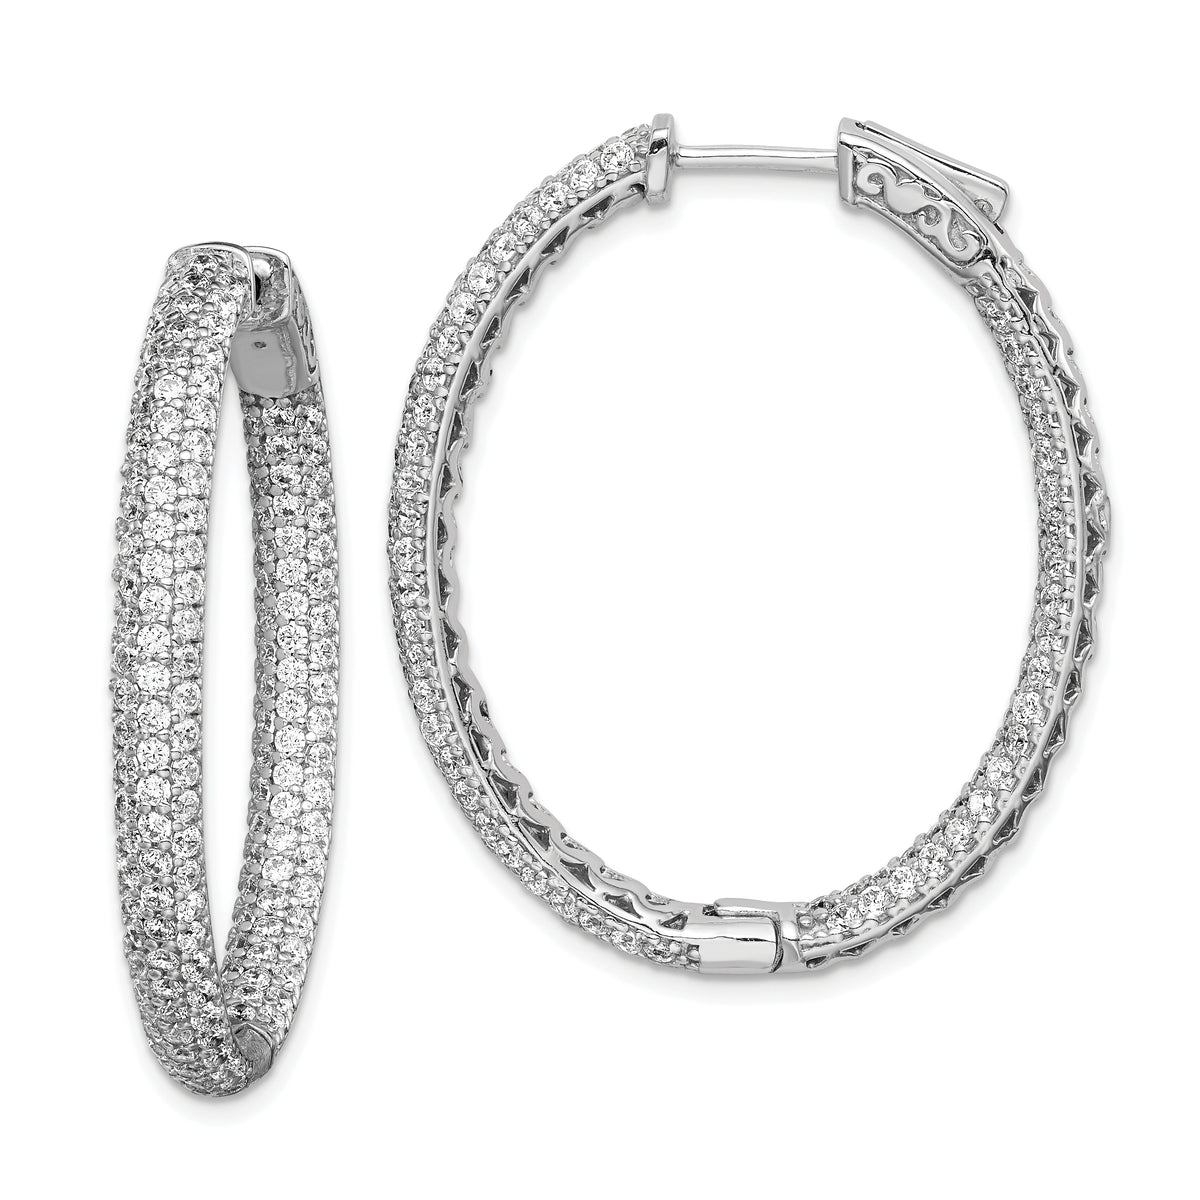 Sterling Shimmer Sterling Silver Rhodium-plated 292 Stone Pav‚ 1.5mm CZ In and Out Oval Hinged Hoop Earrings